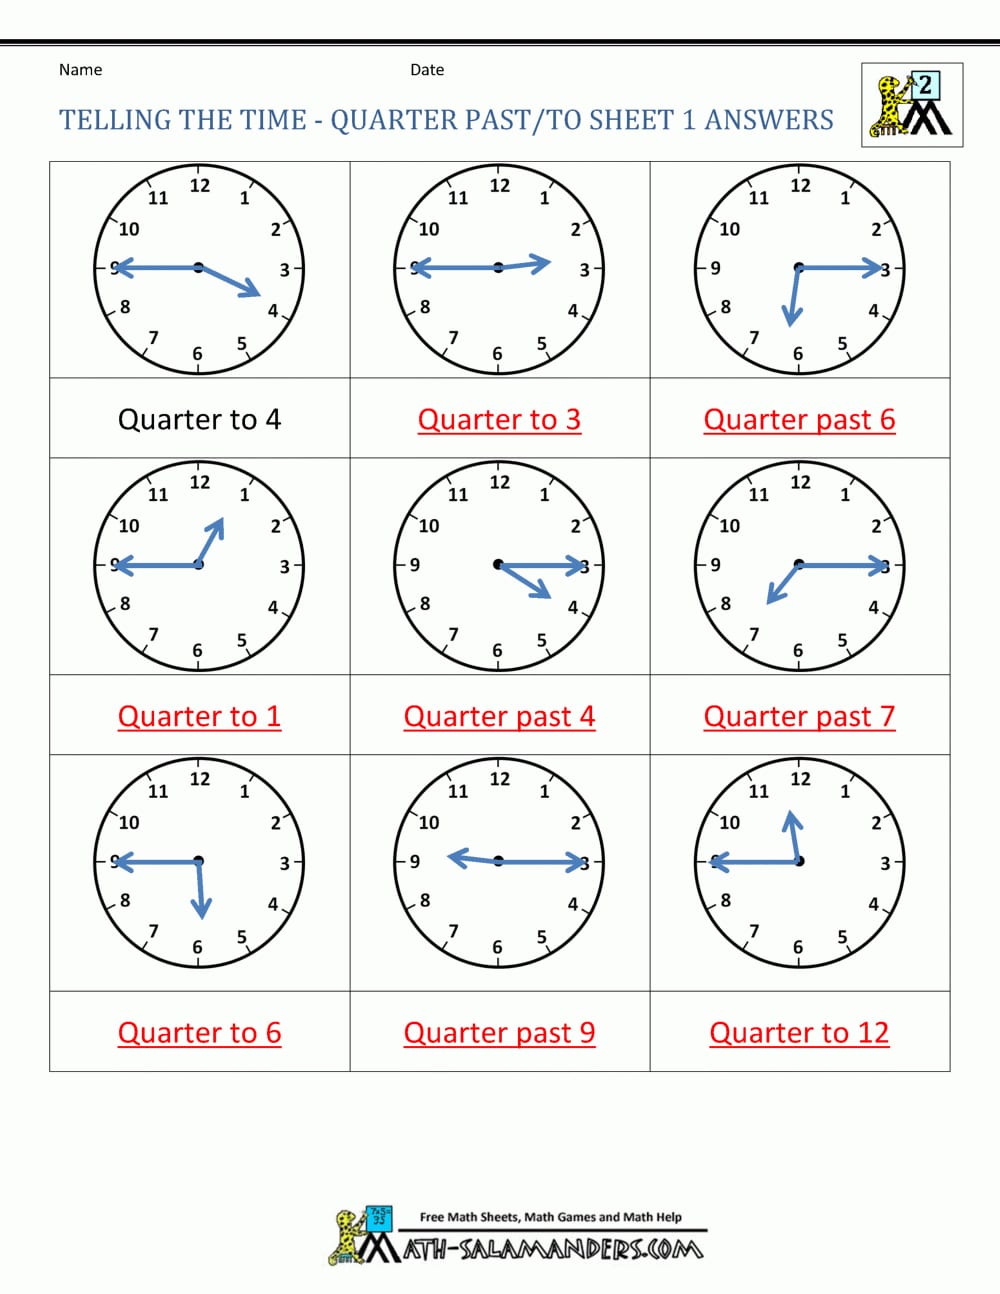 How to tell time. Задания Quarter past. Telling the time упражнения. Telling the time Quarter. Telling the time задания.